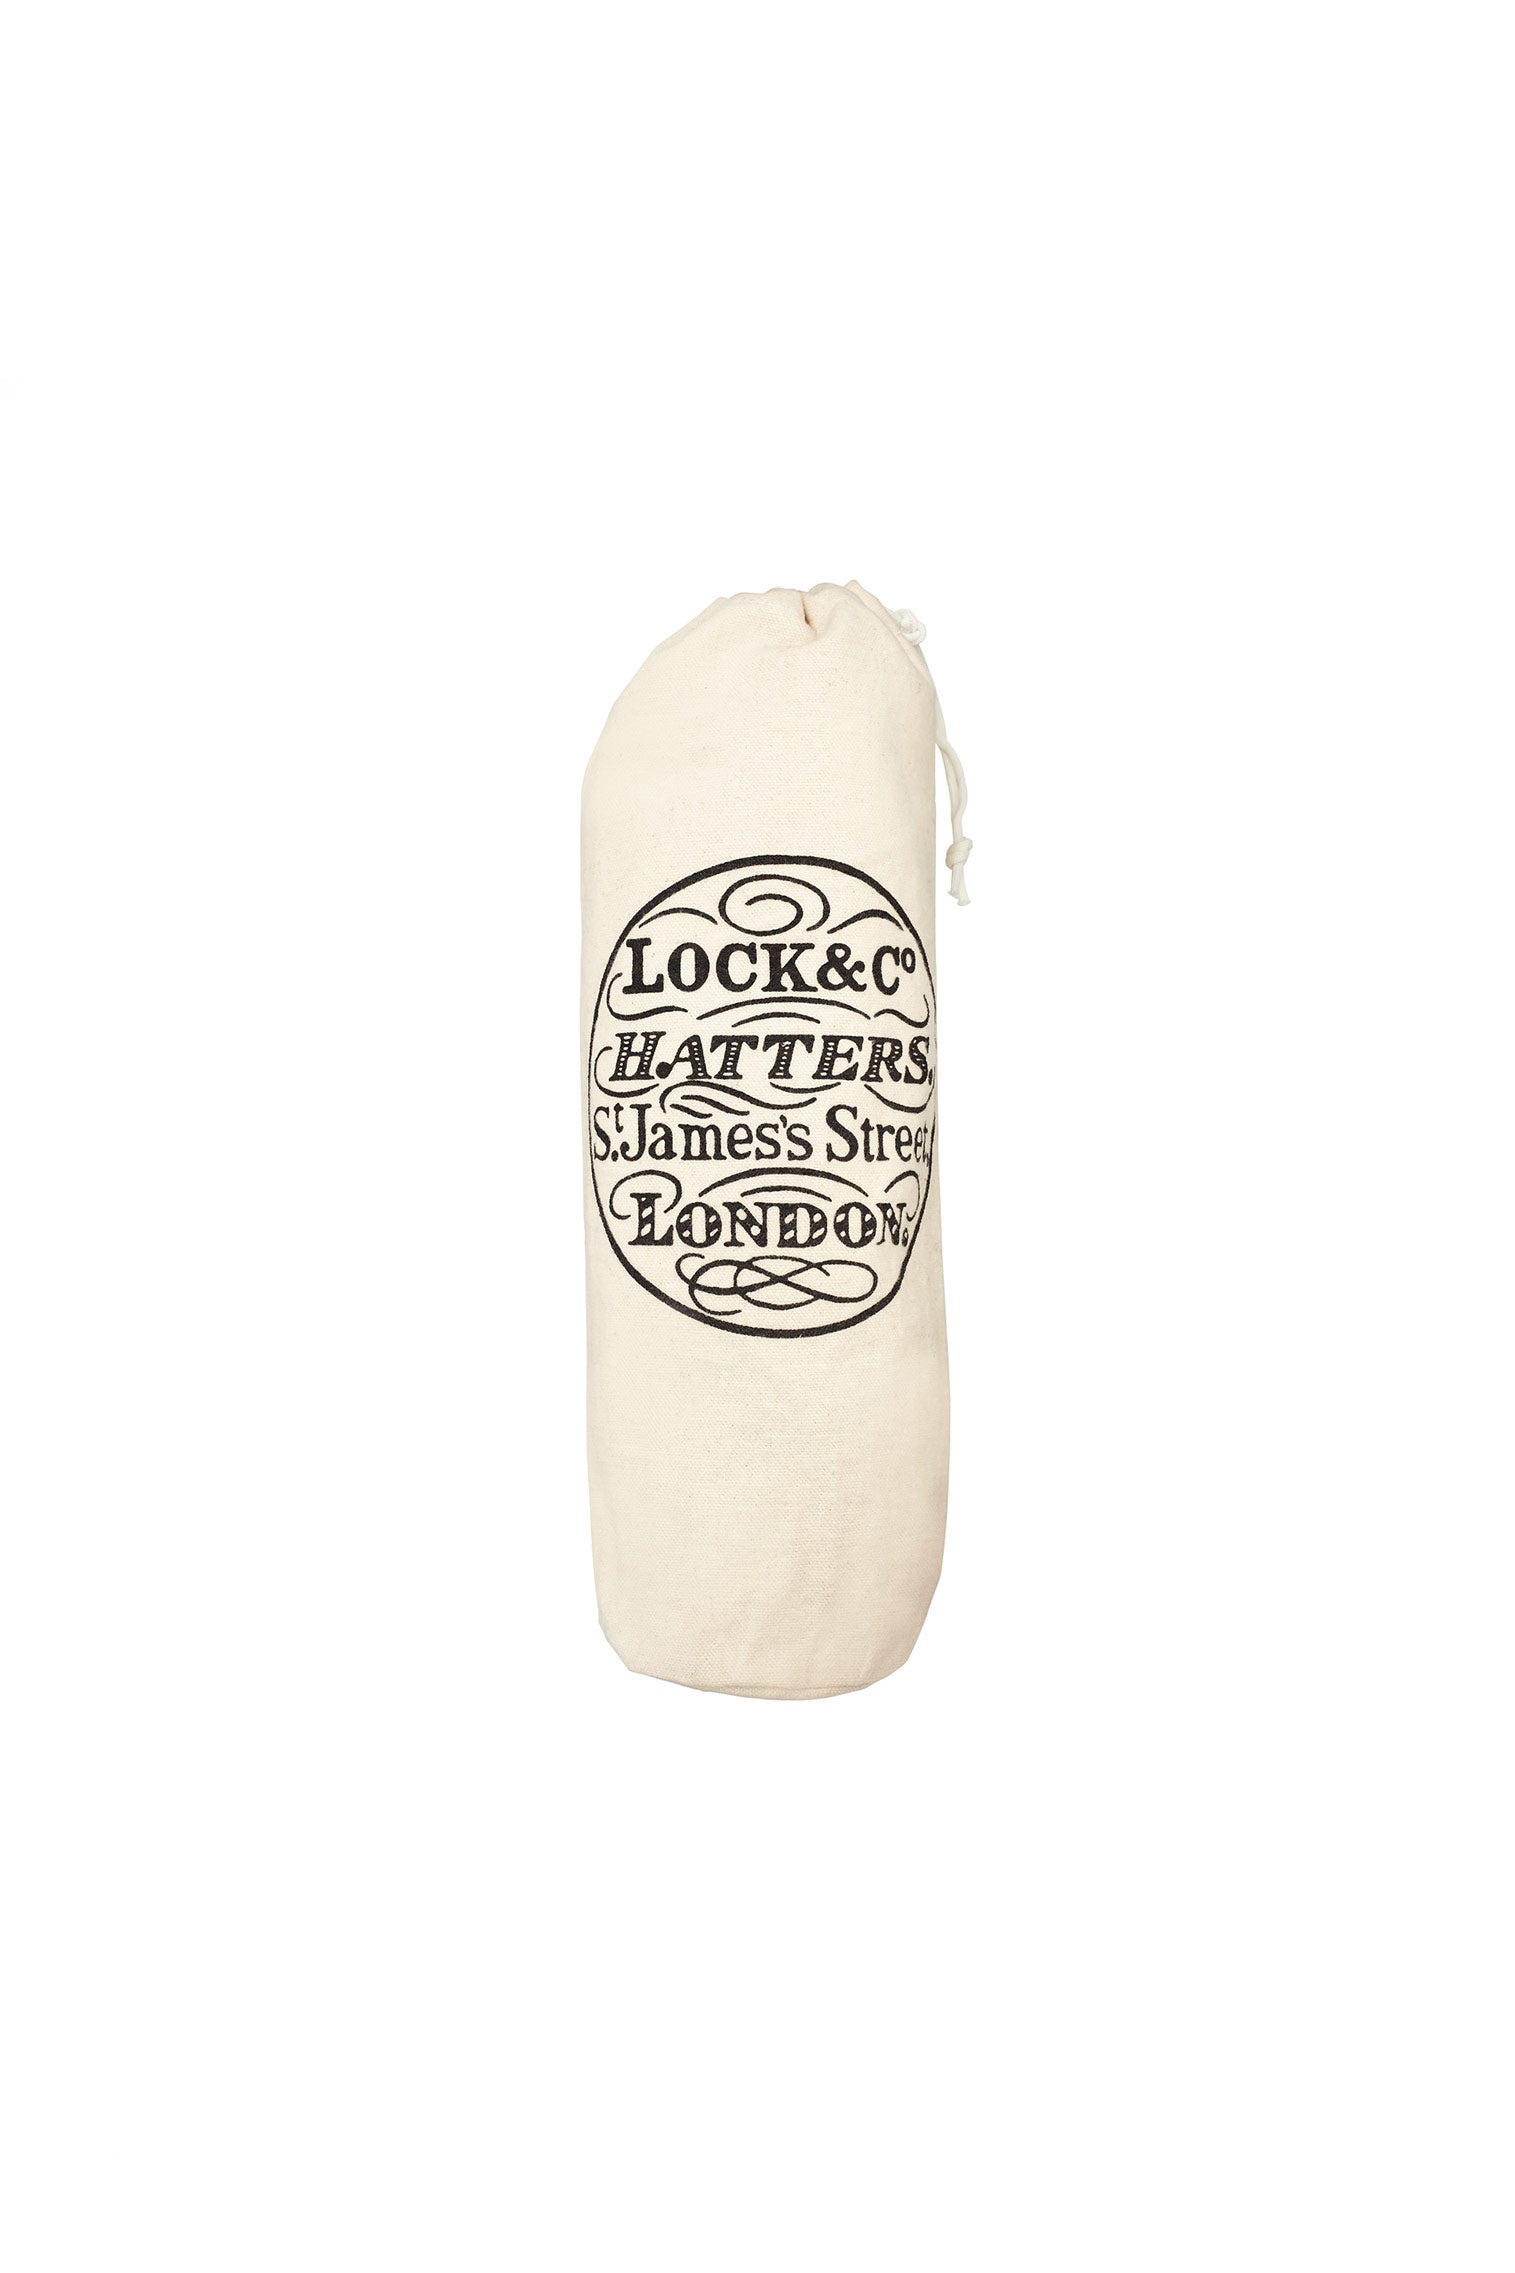 Canvas Tube - Products - Lock & Co. Hatters London UK